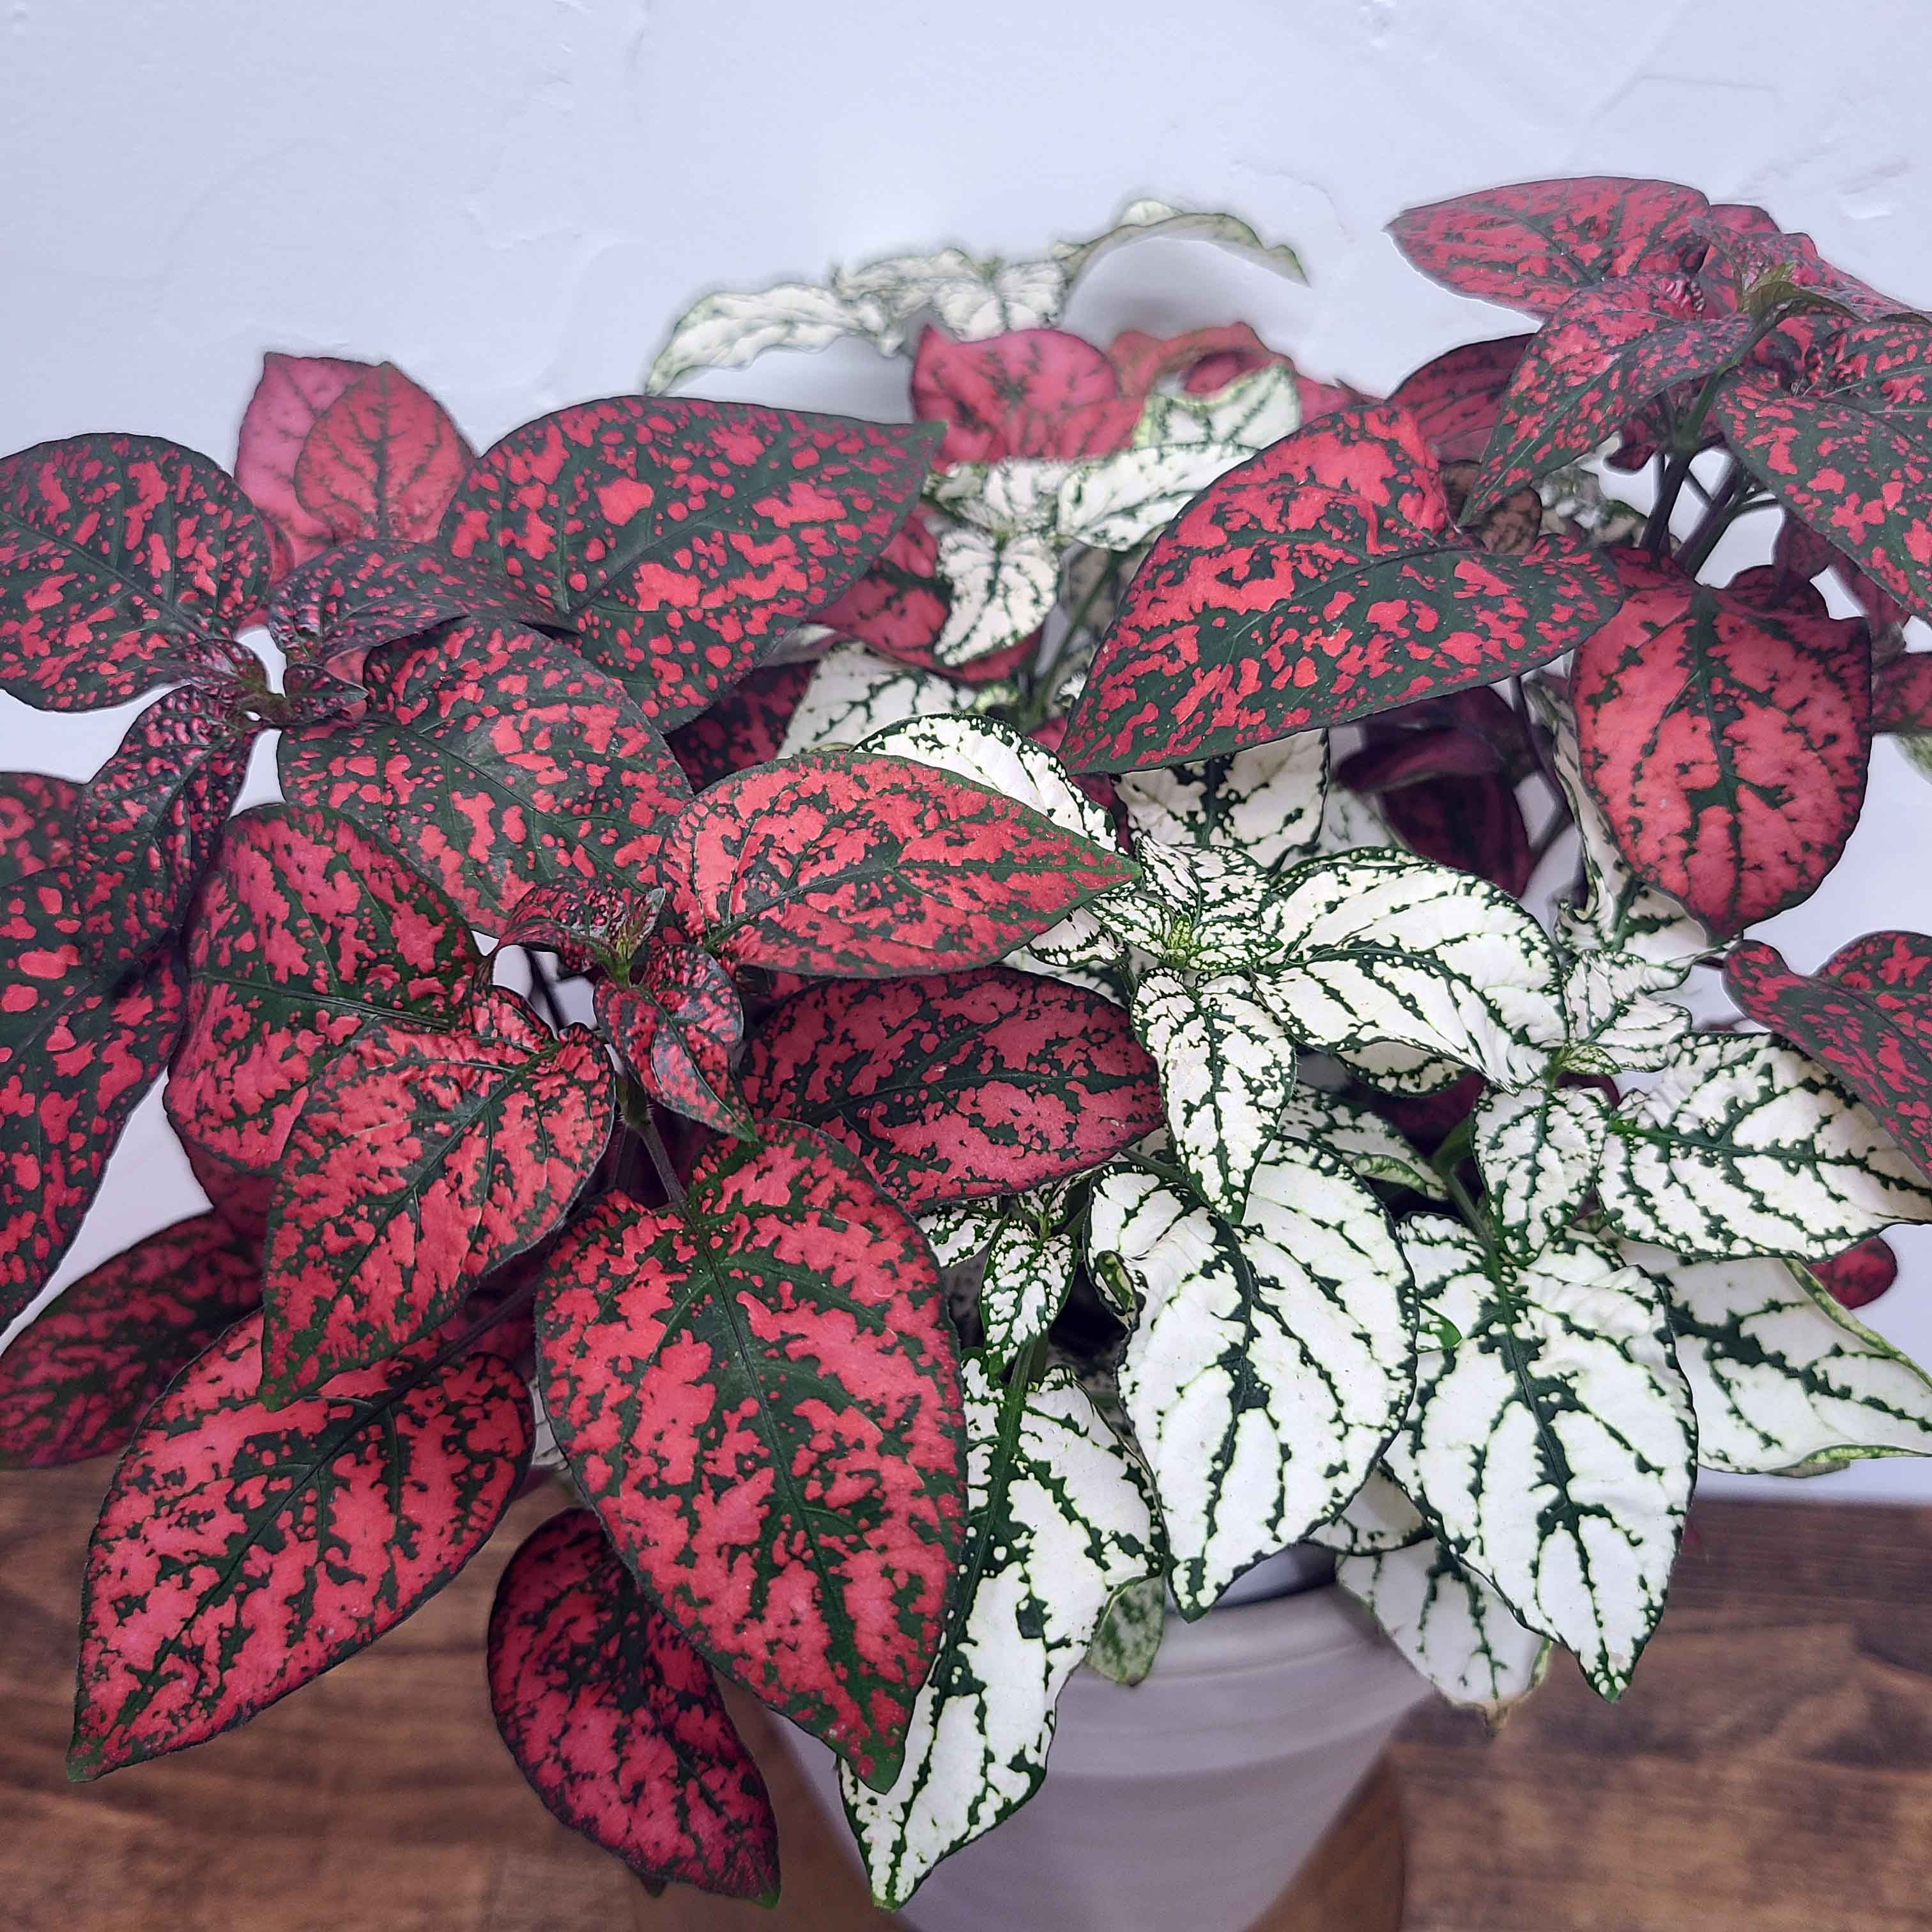 RED AND WHITE SPLASH by Denver Plant Delivery